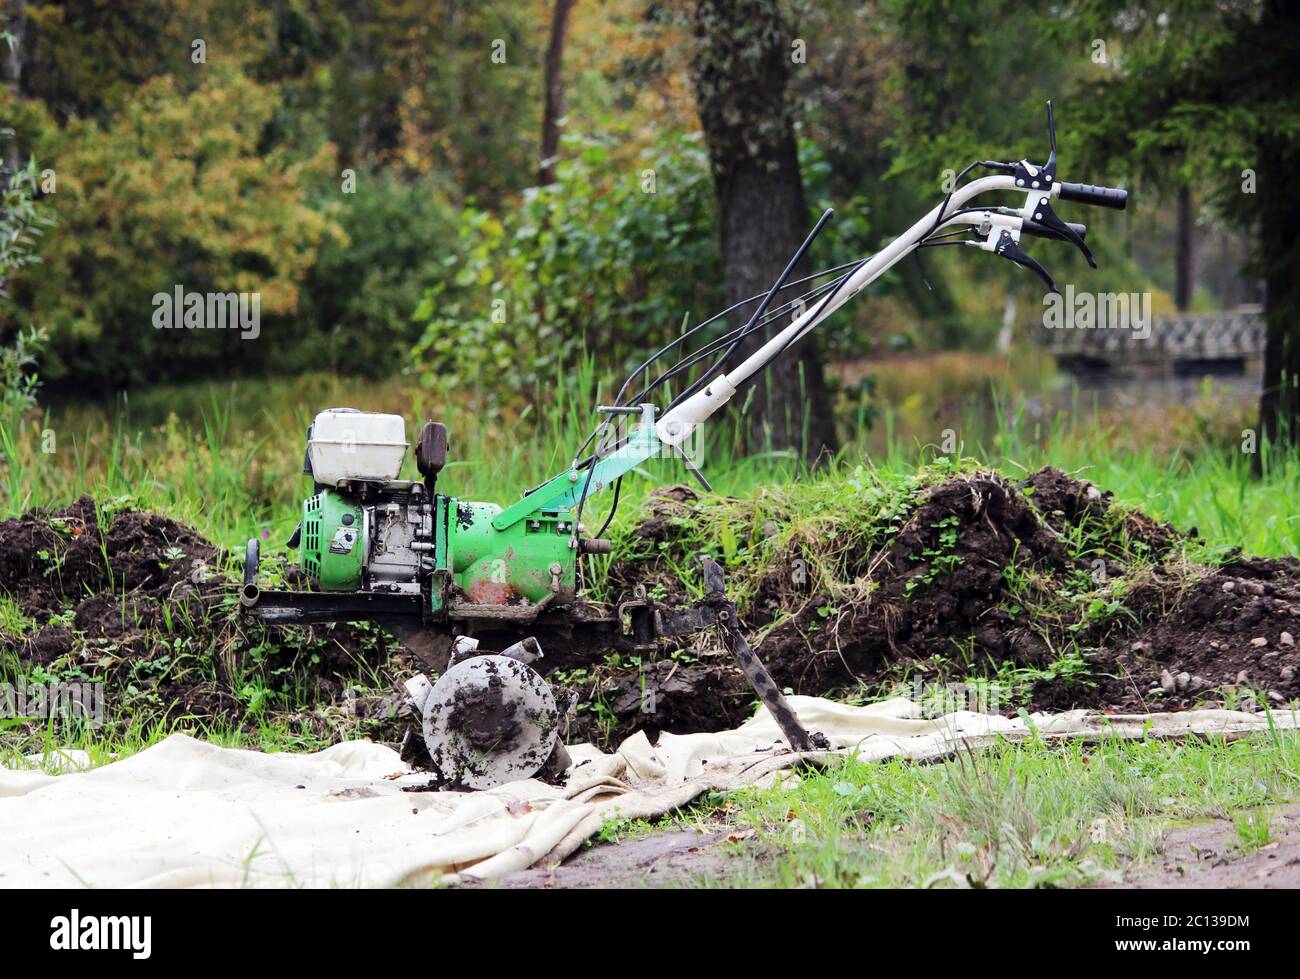 working motor-cultivator tiller in Gatchina park is on the ground waiting for work. Stock Photo